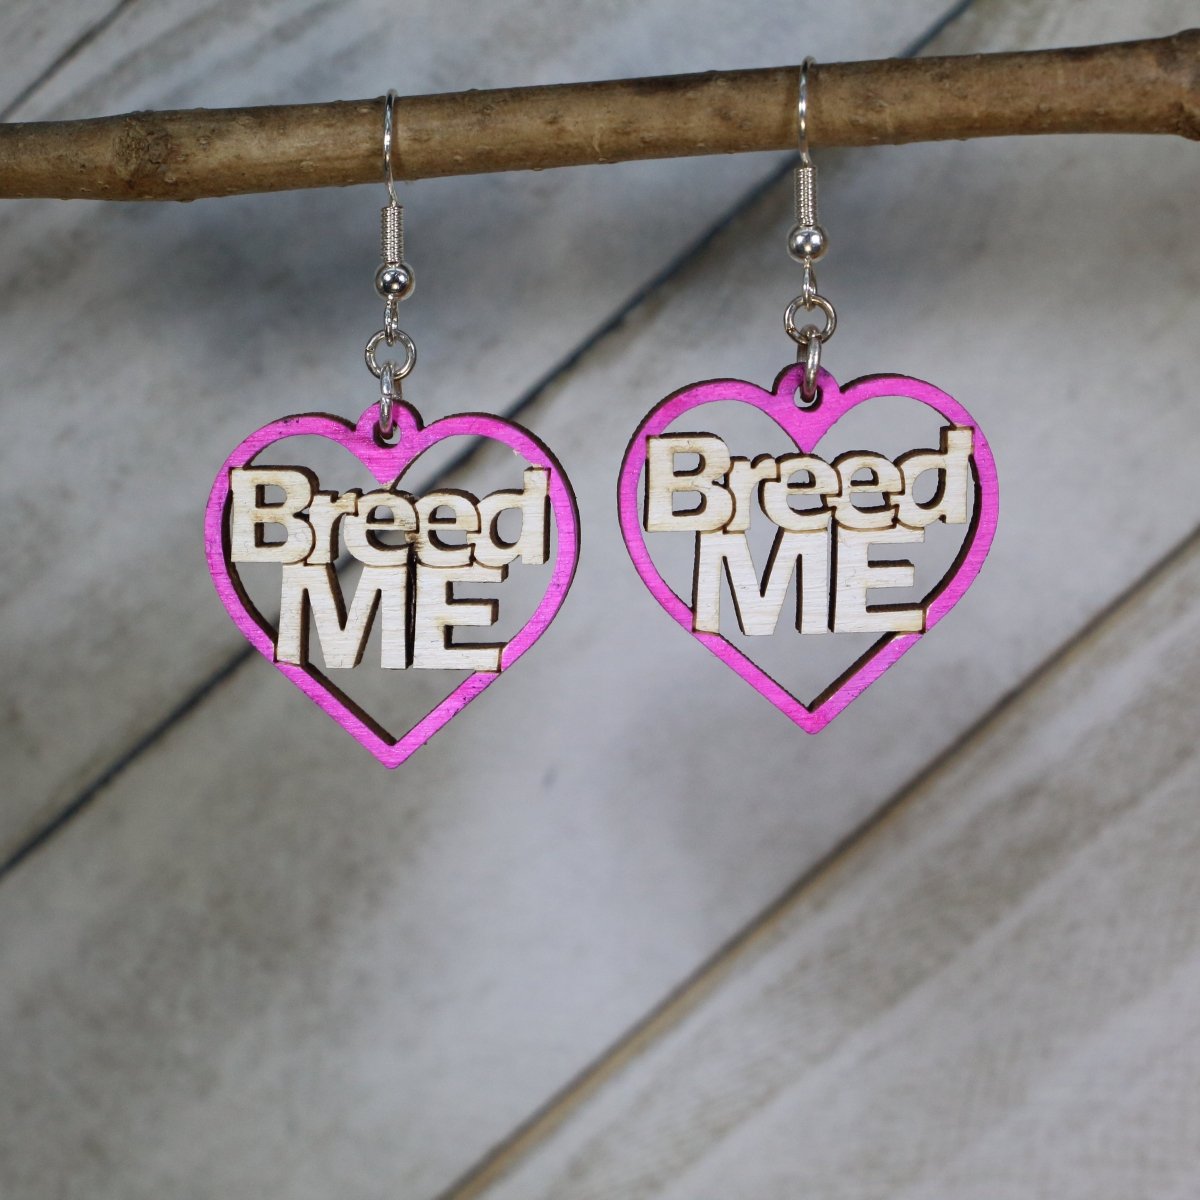 Captivating Breed Me Wooden Dangle Earrings - Pink - Cate's Concepts, LLC